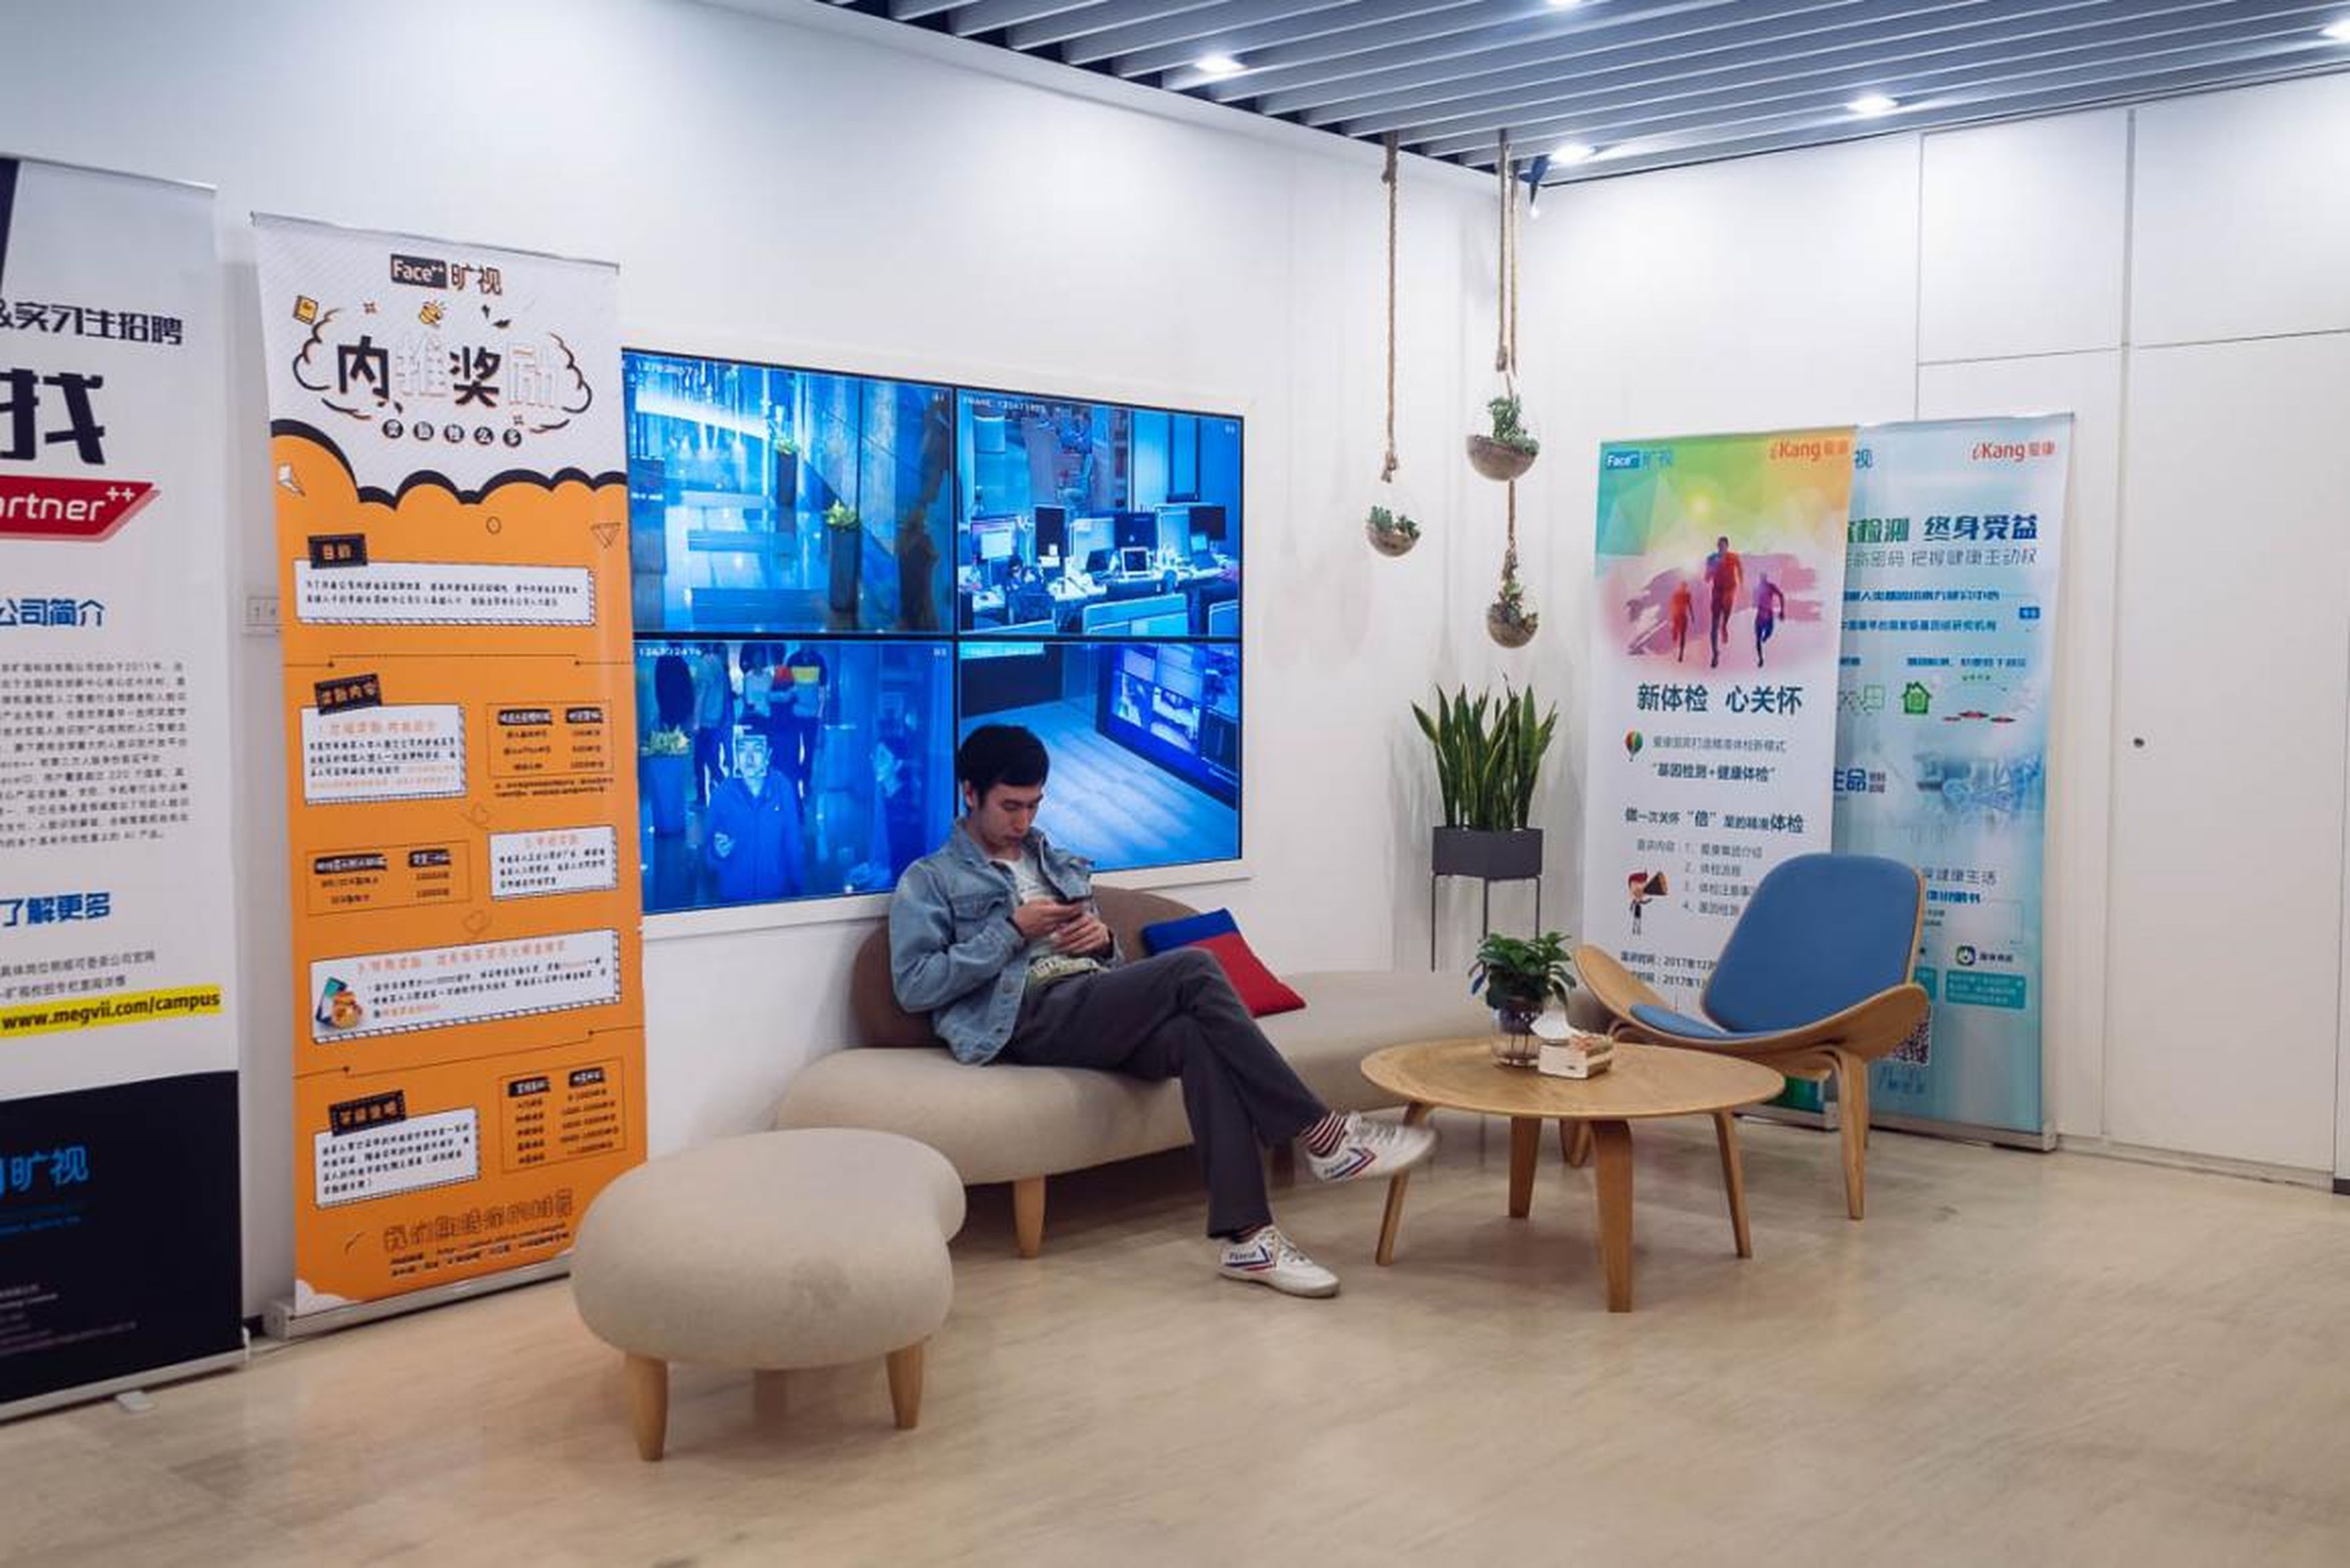 Xie suggested that the aims of real-name authentication are more benign. As more citizens use services like ride-hailing app Didi Chuxing and other sharing services, its important that users on both sides can be tracked down if